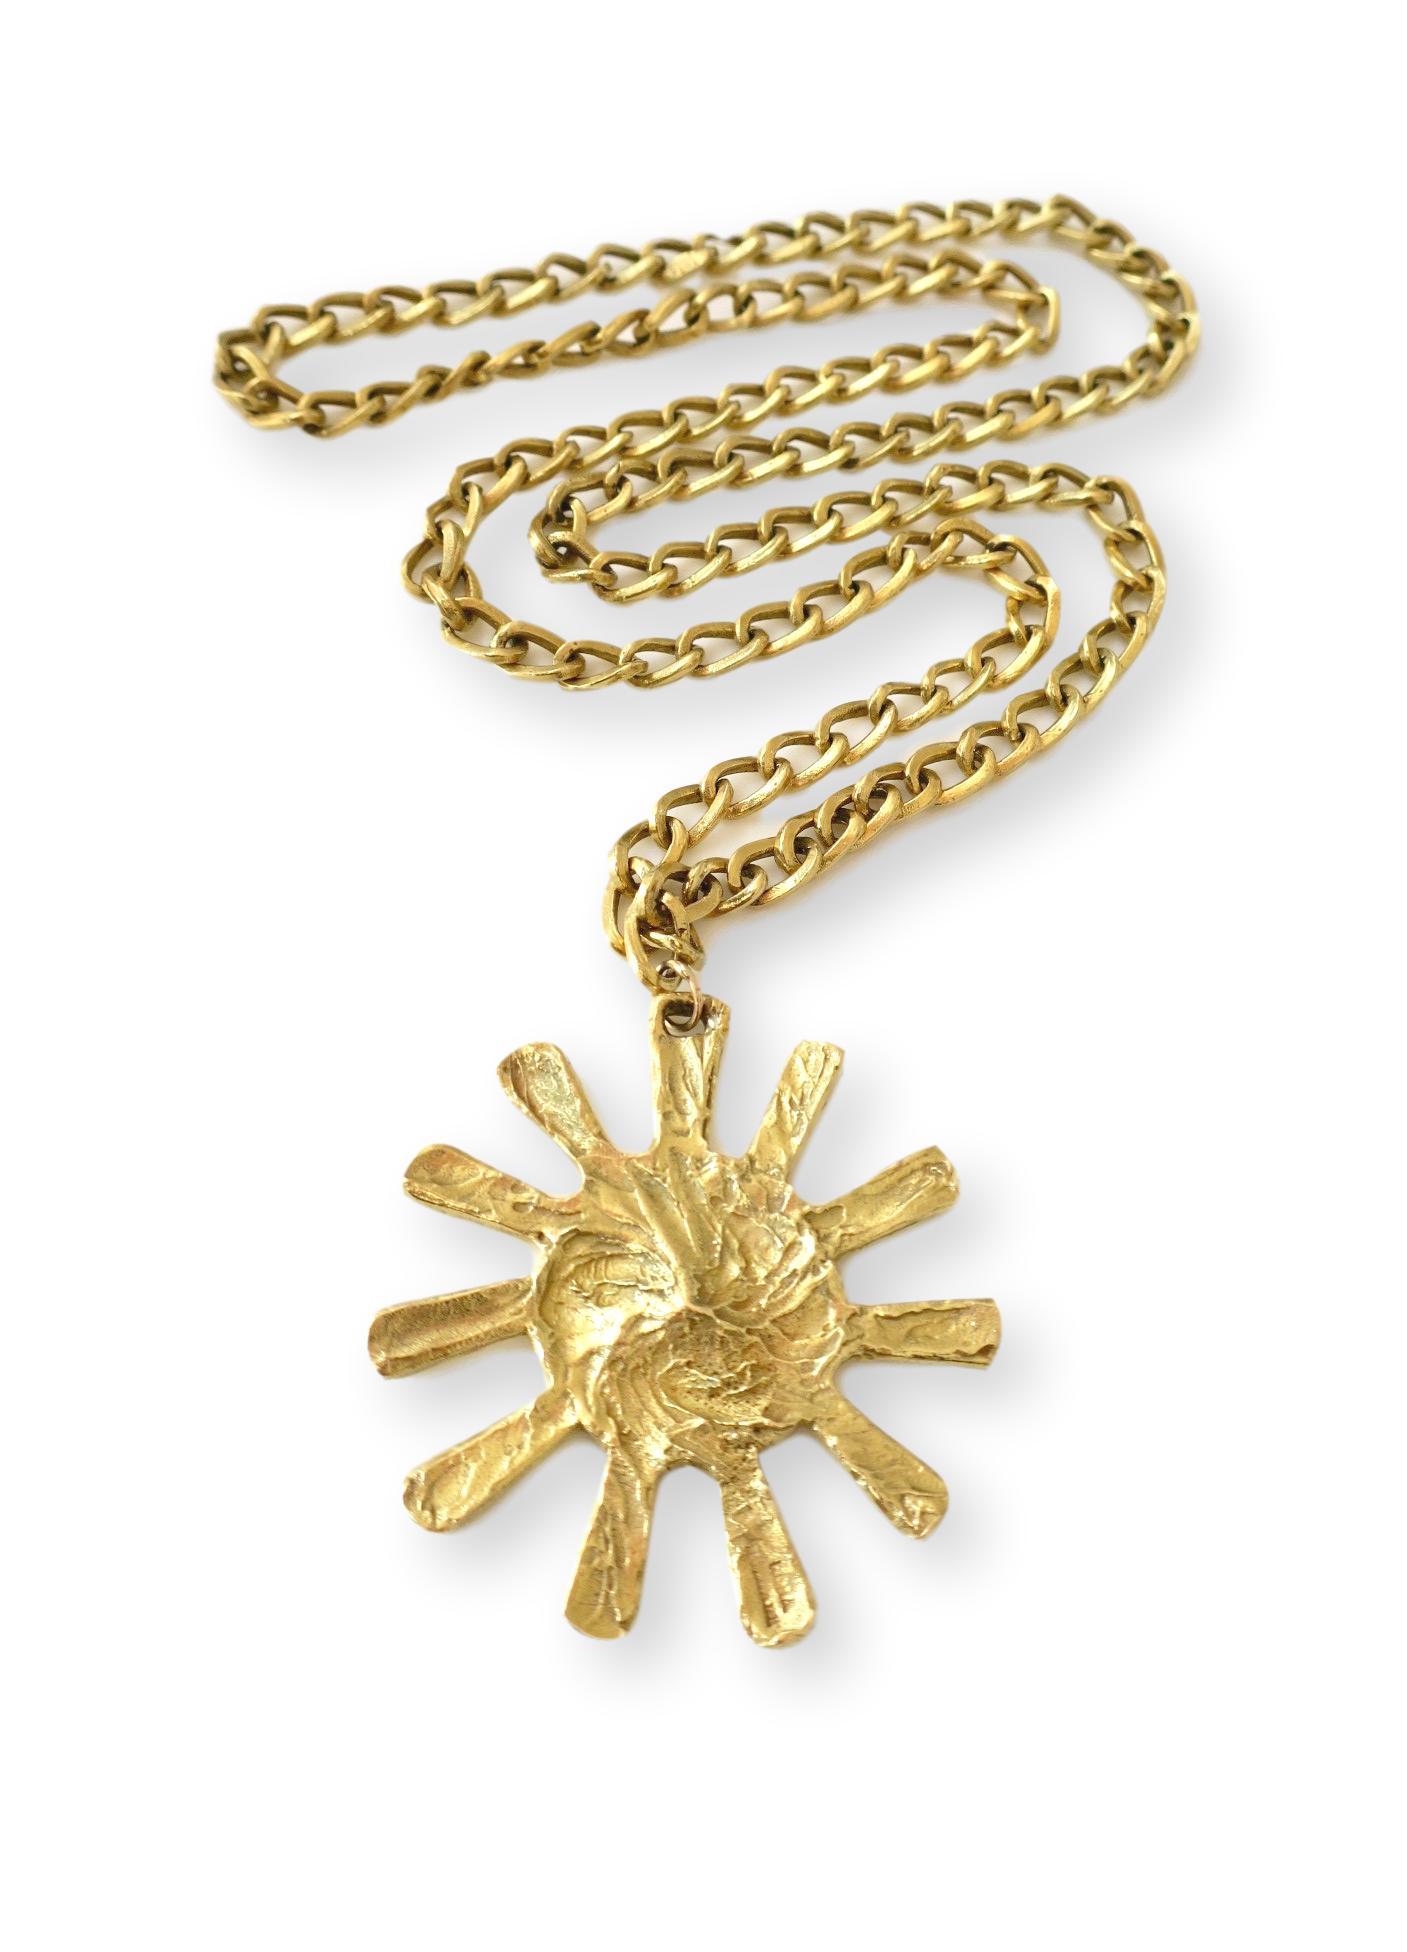 70's Unisex Chain Necklace by Bulgari. The 18k  2